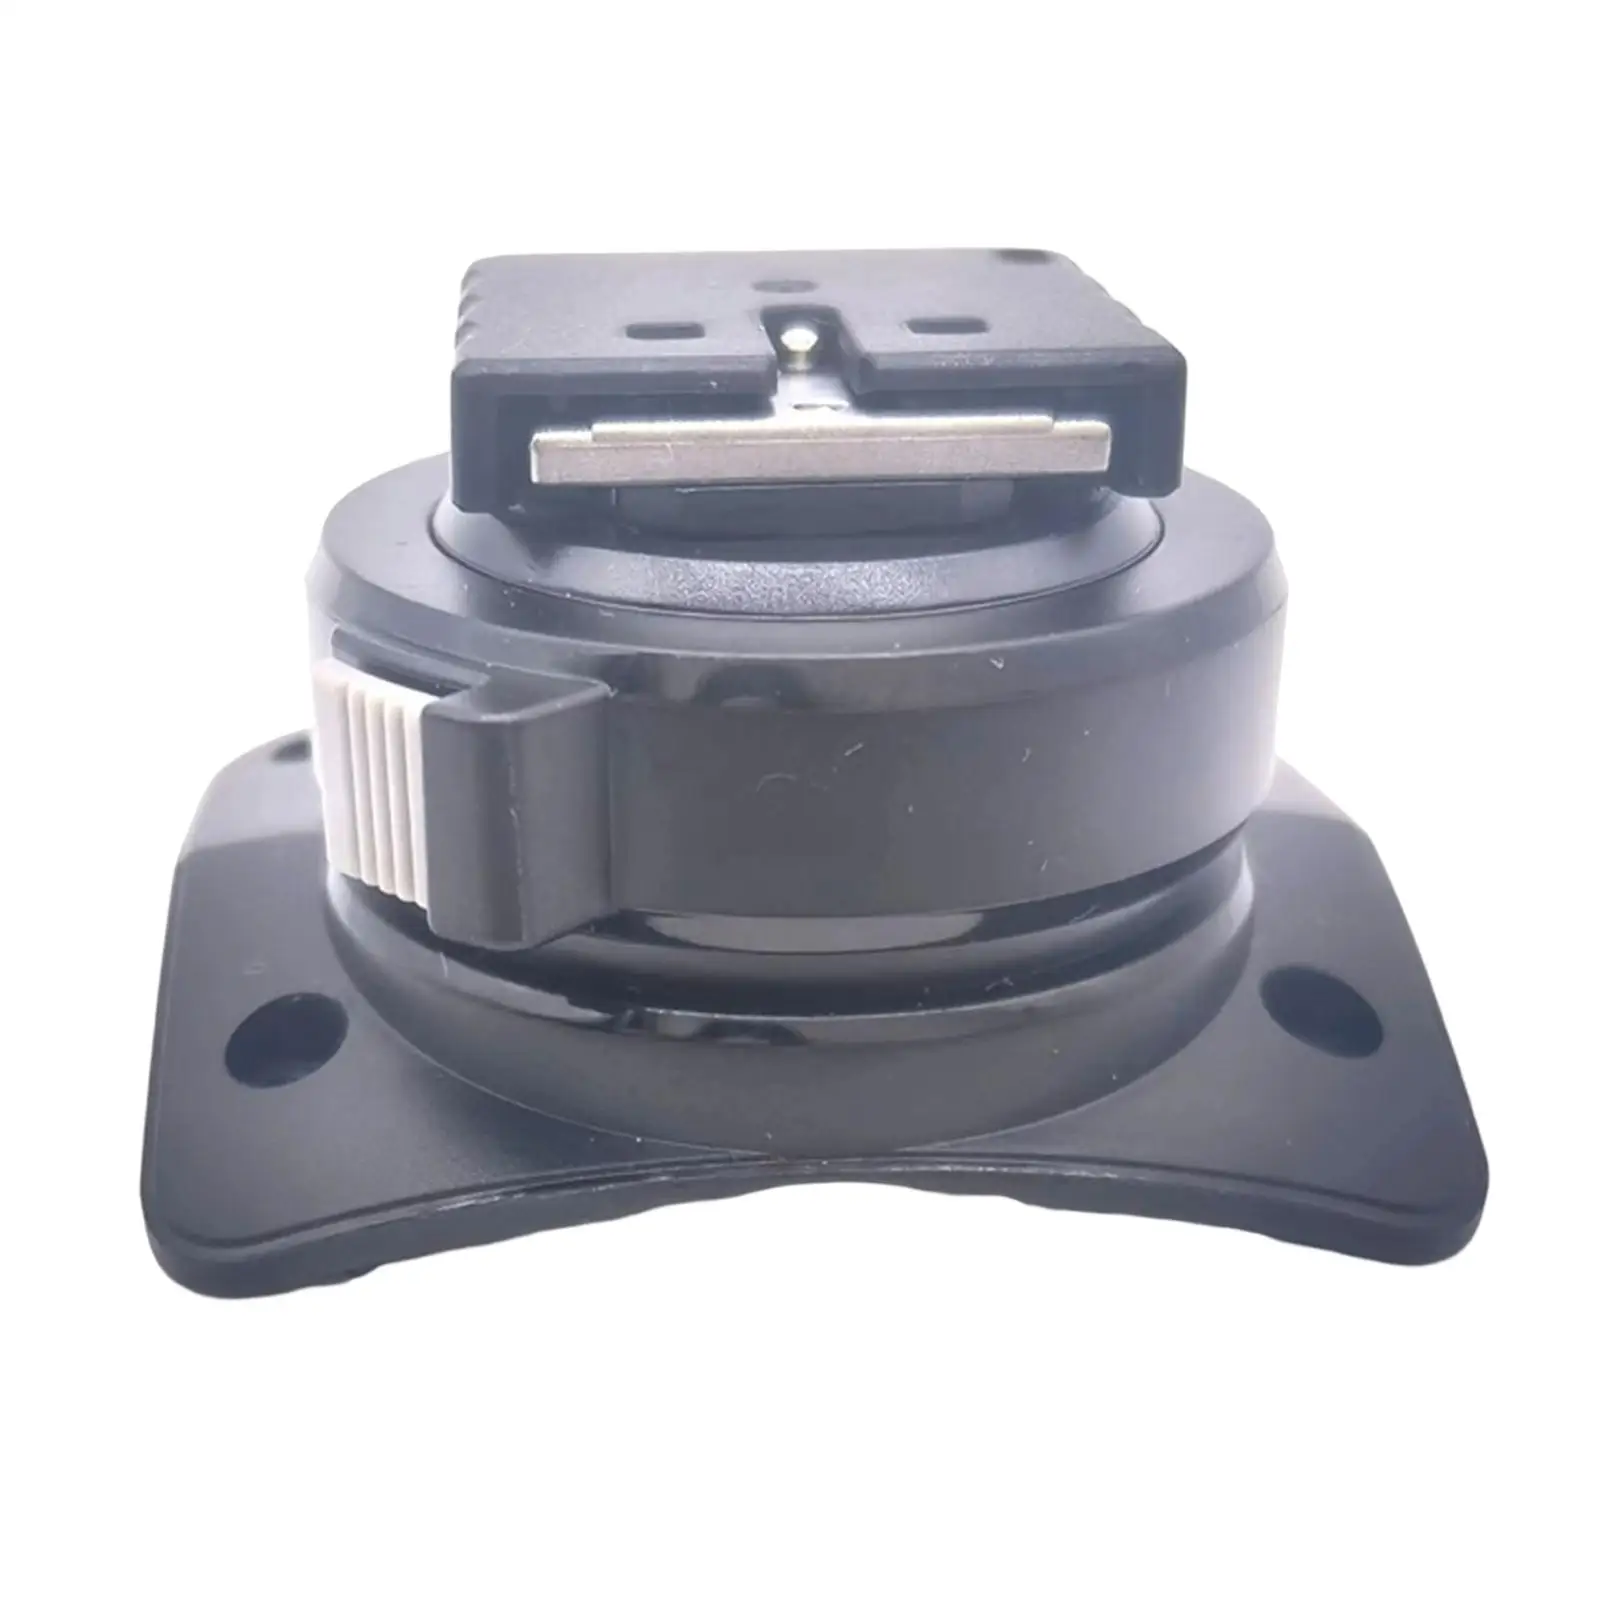 Metal Hot Shoe Base Foot for V860ii-s Flash Easily Install Stable Performance Repair Parts Upgraded Metal Version